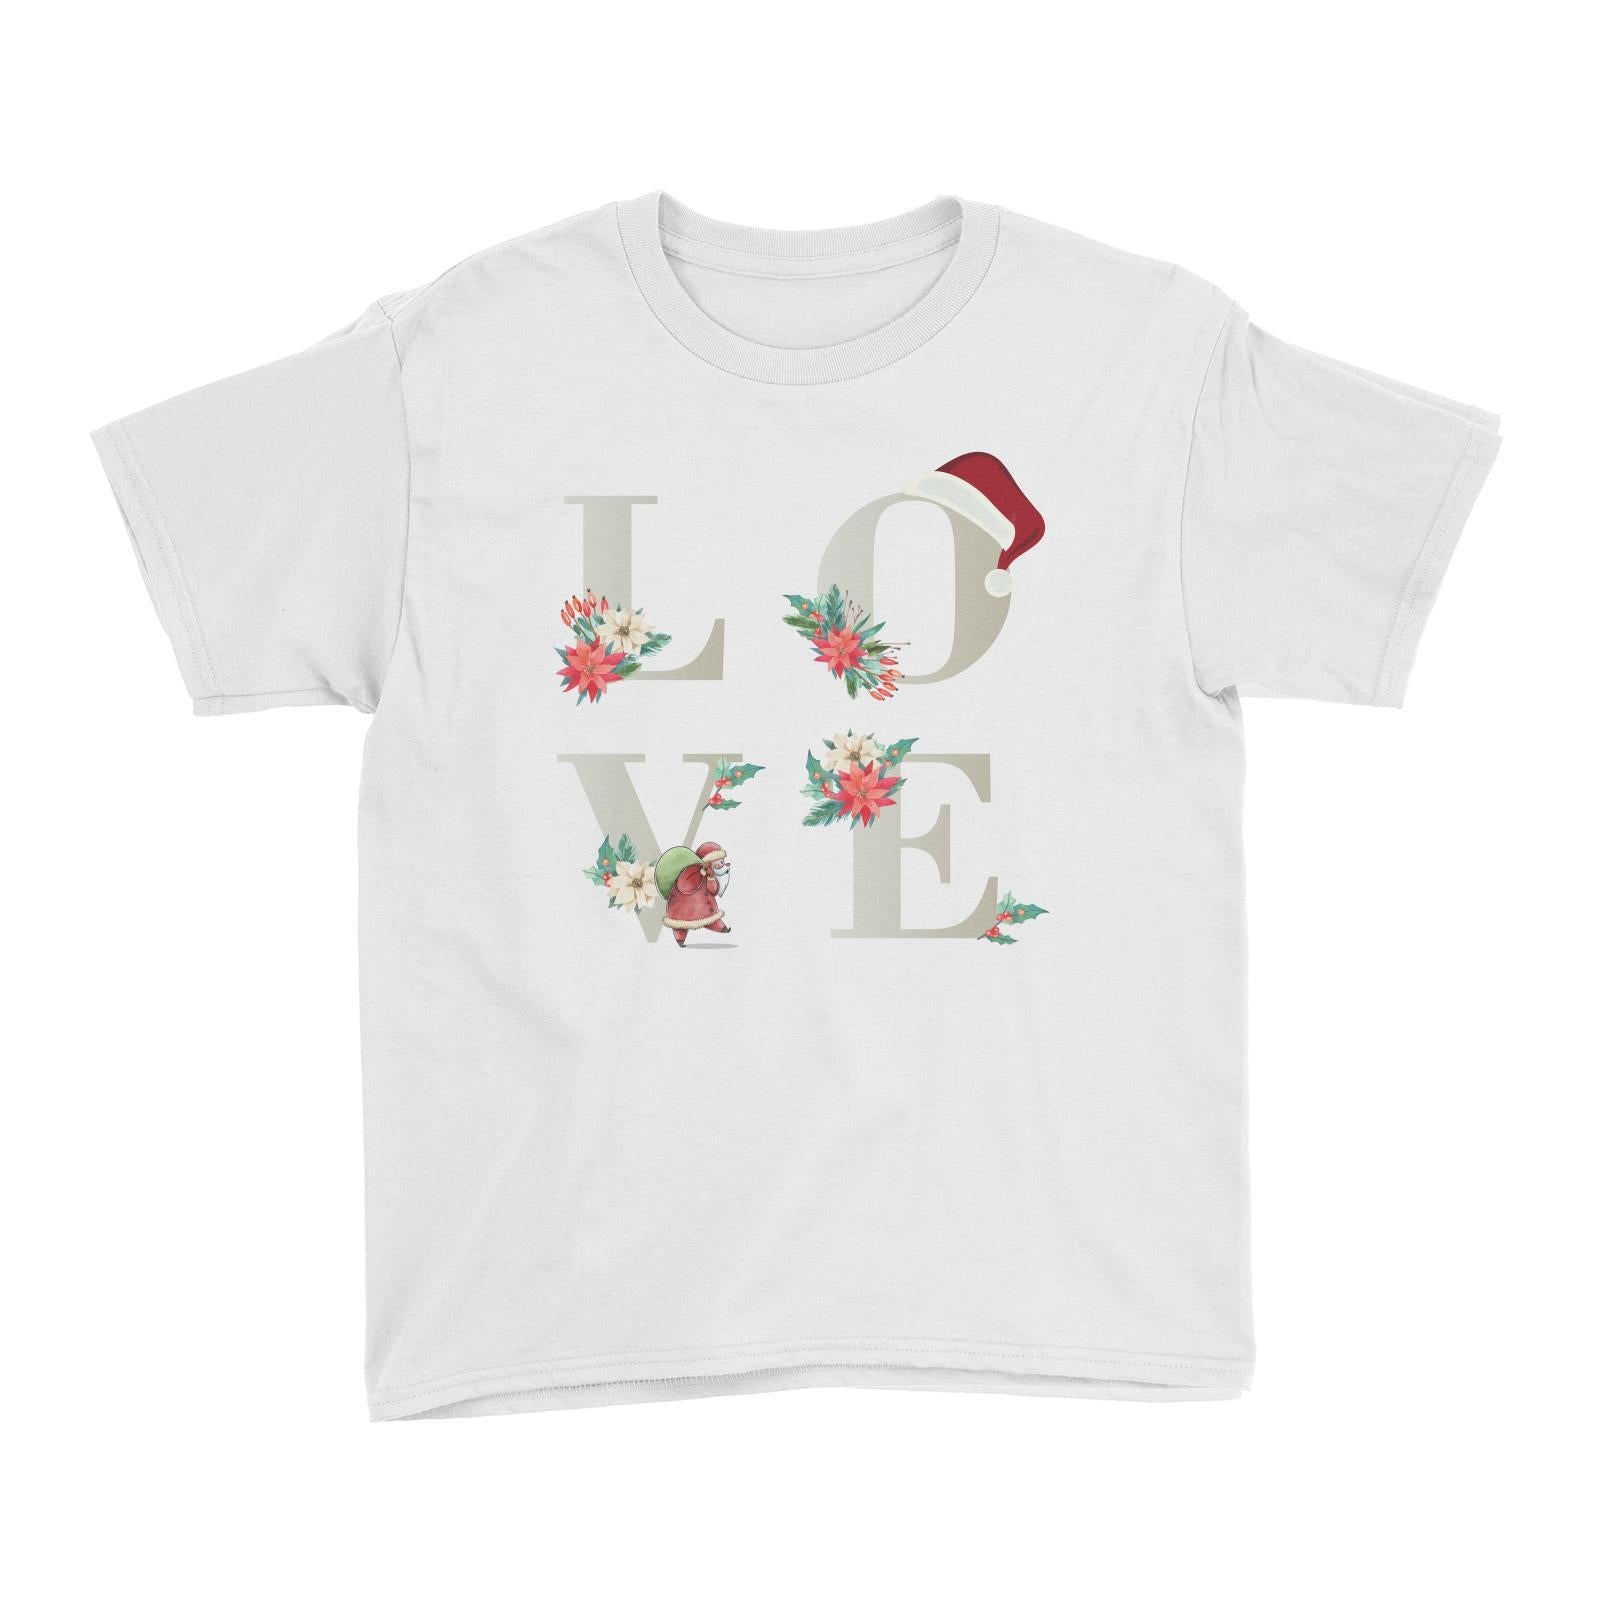 LOVE with Christmas Elements Kid's T-Shirt  Matching Family Personalisable Designs